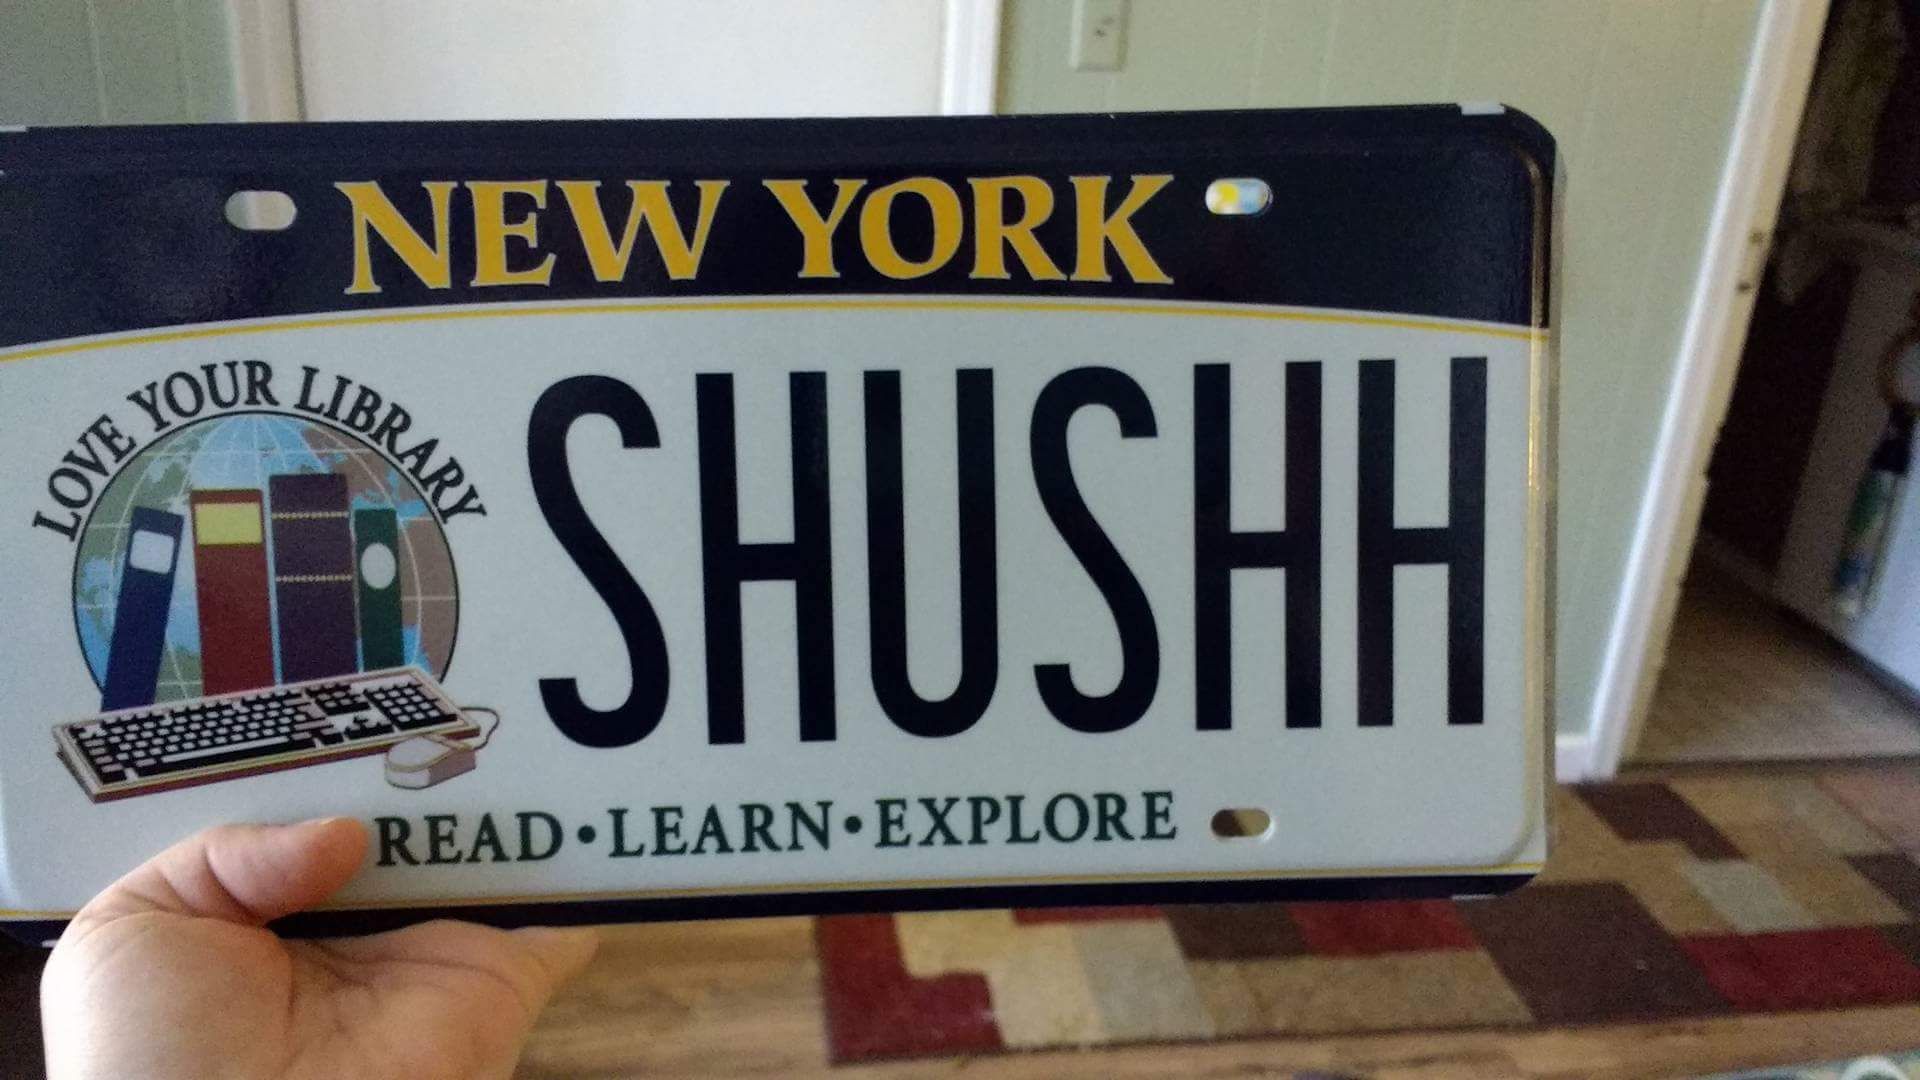 My wife, the librarian, received her new vanity plates yesterday.